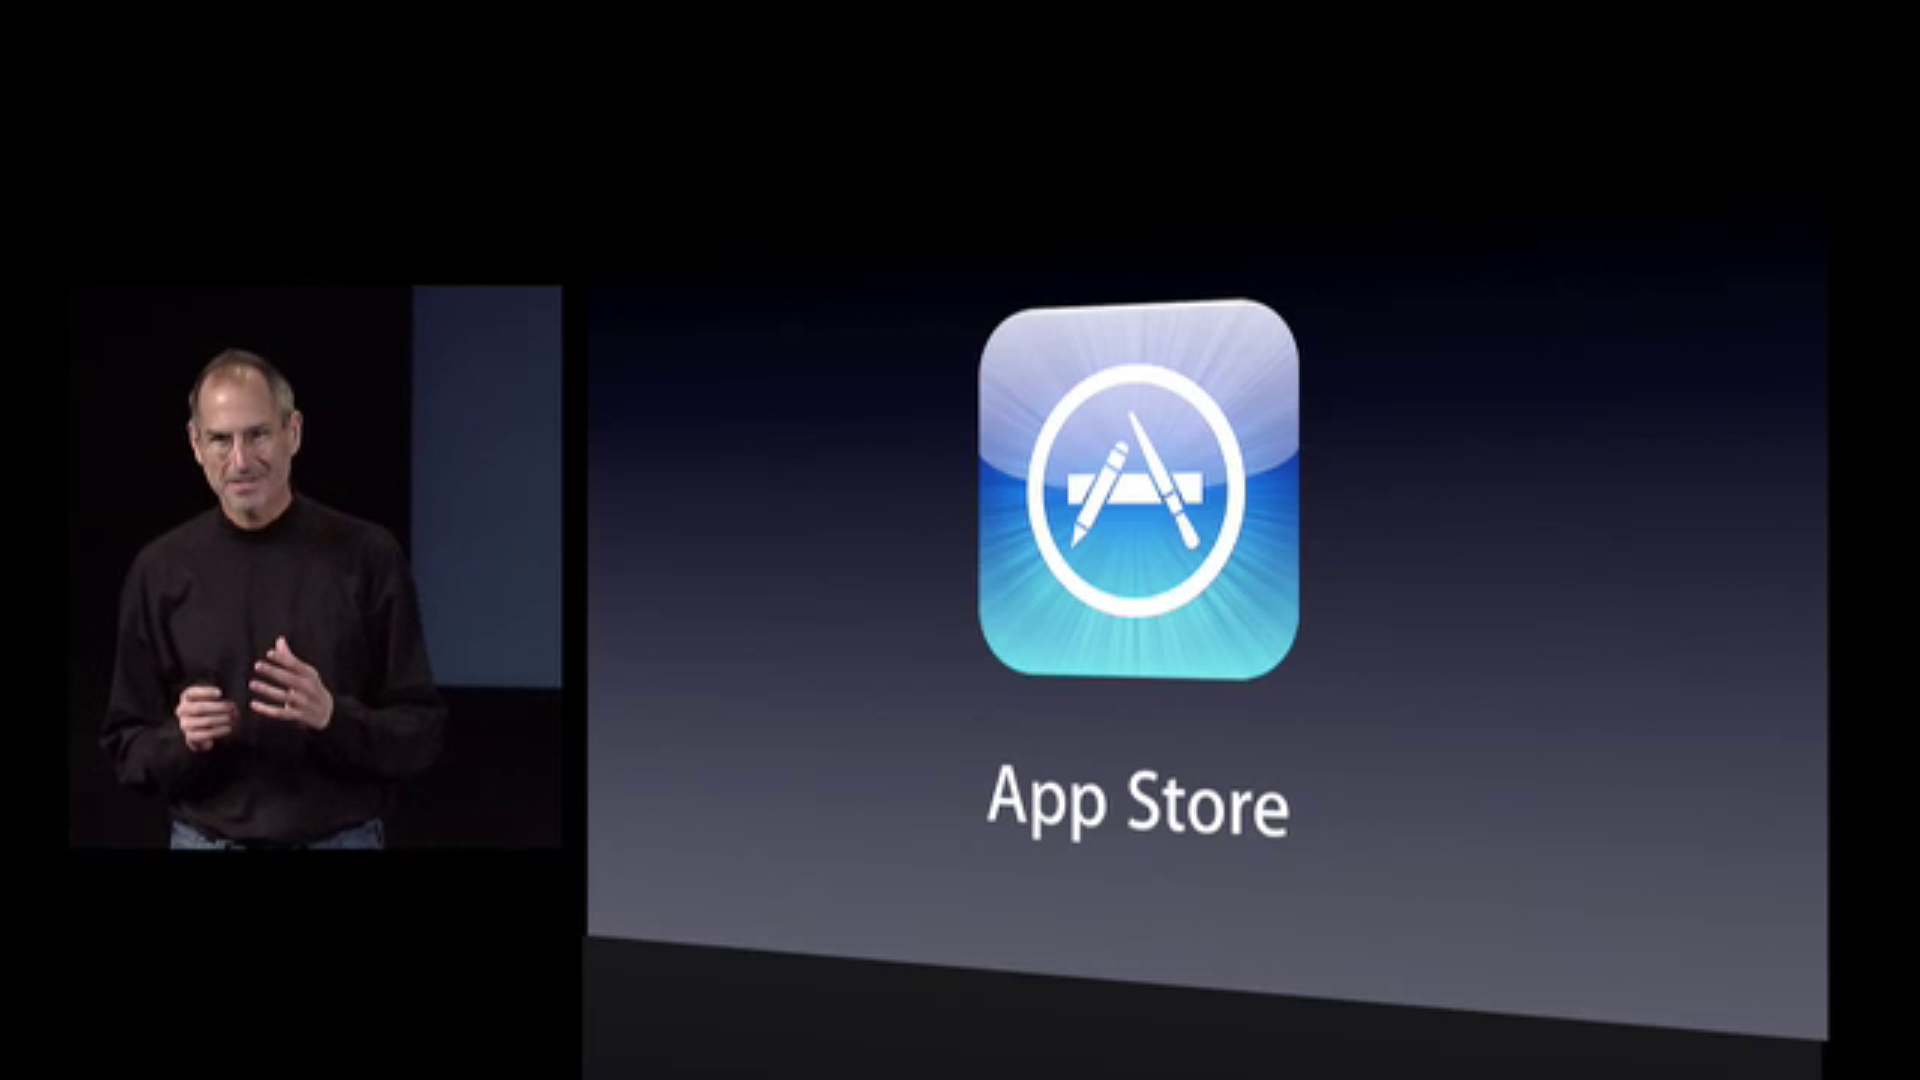 Not even Steve Jobs in 2008 believed that the App Store would be that big